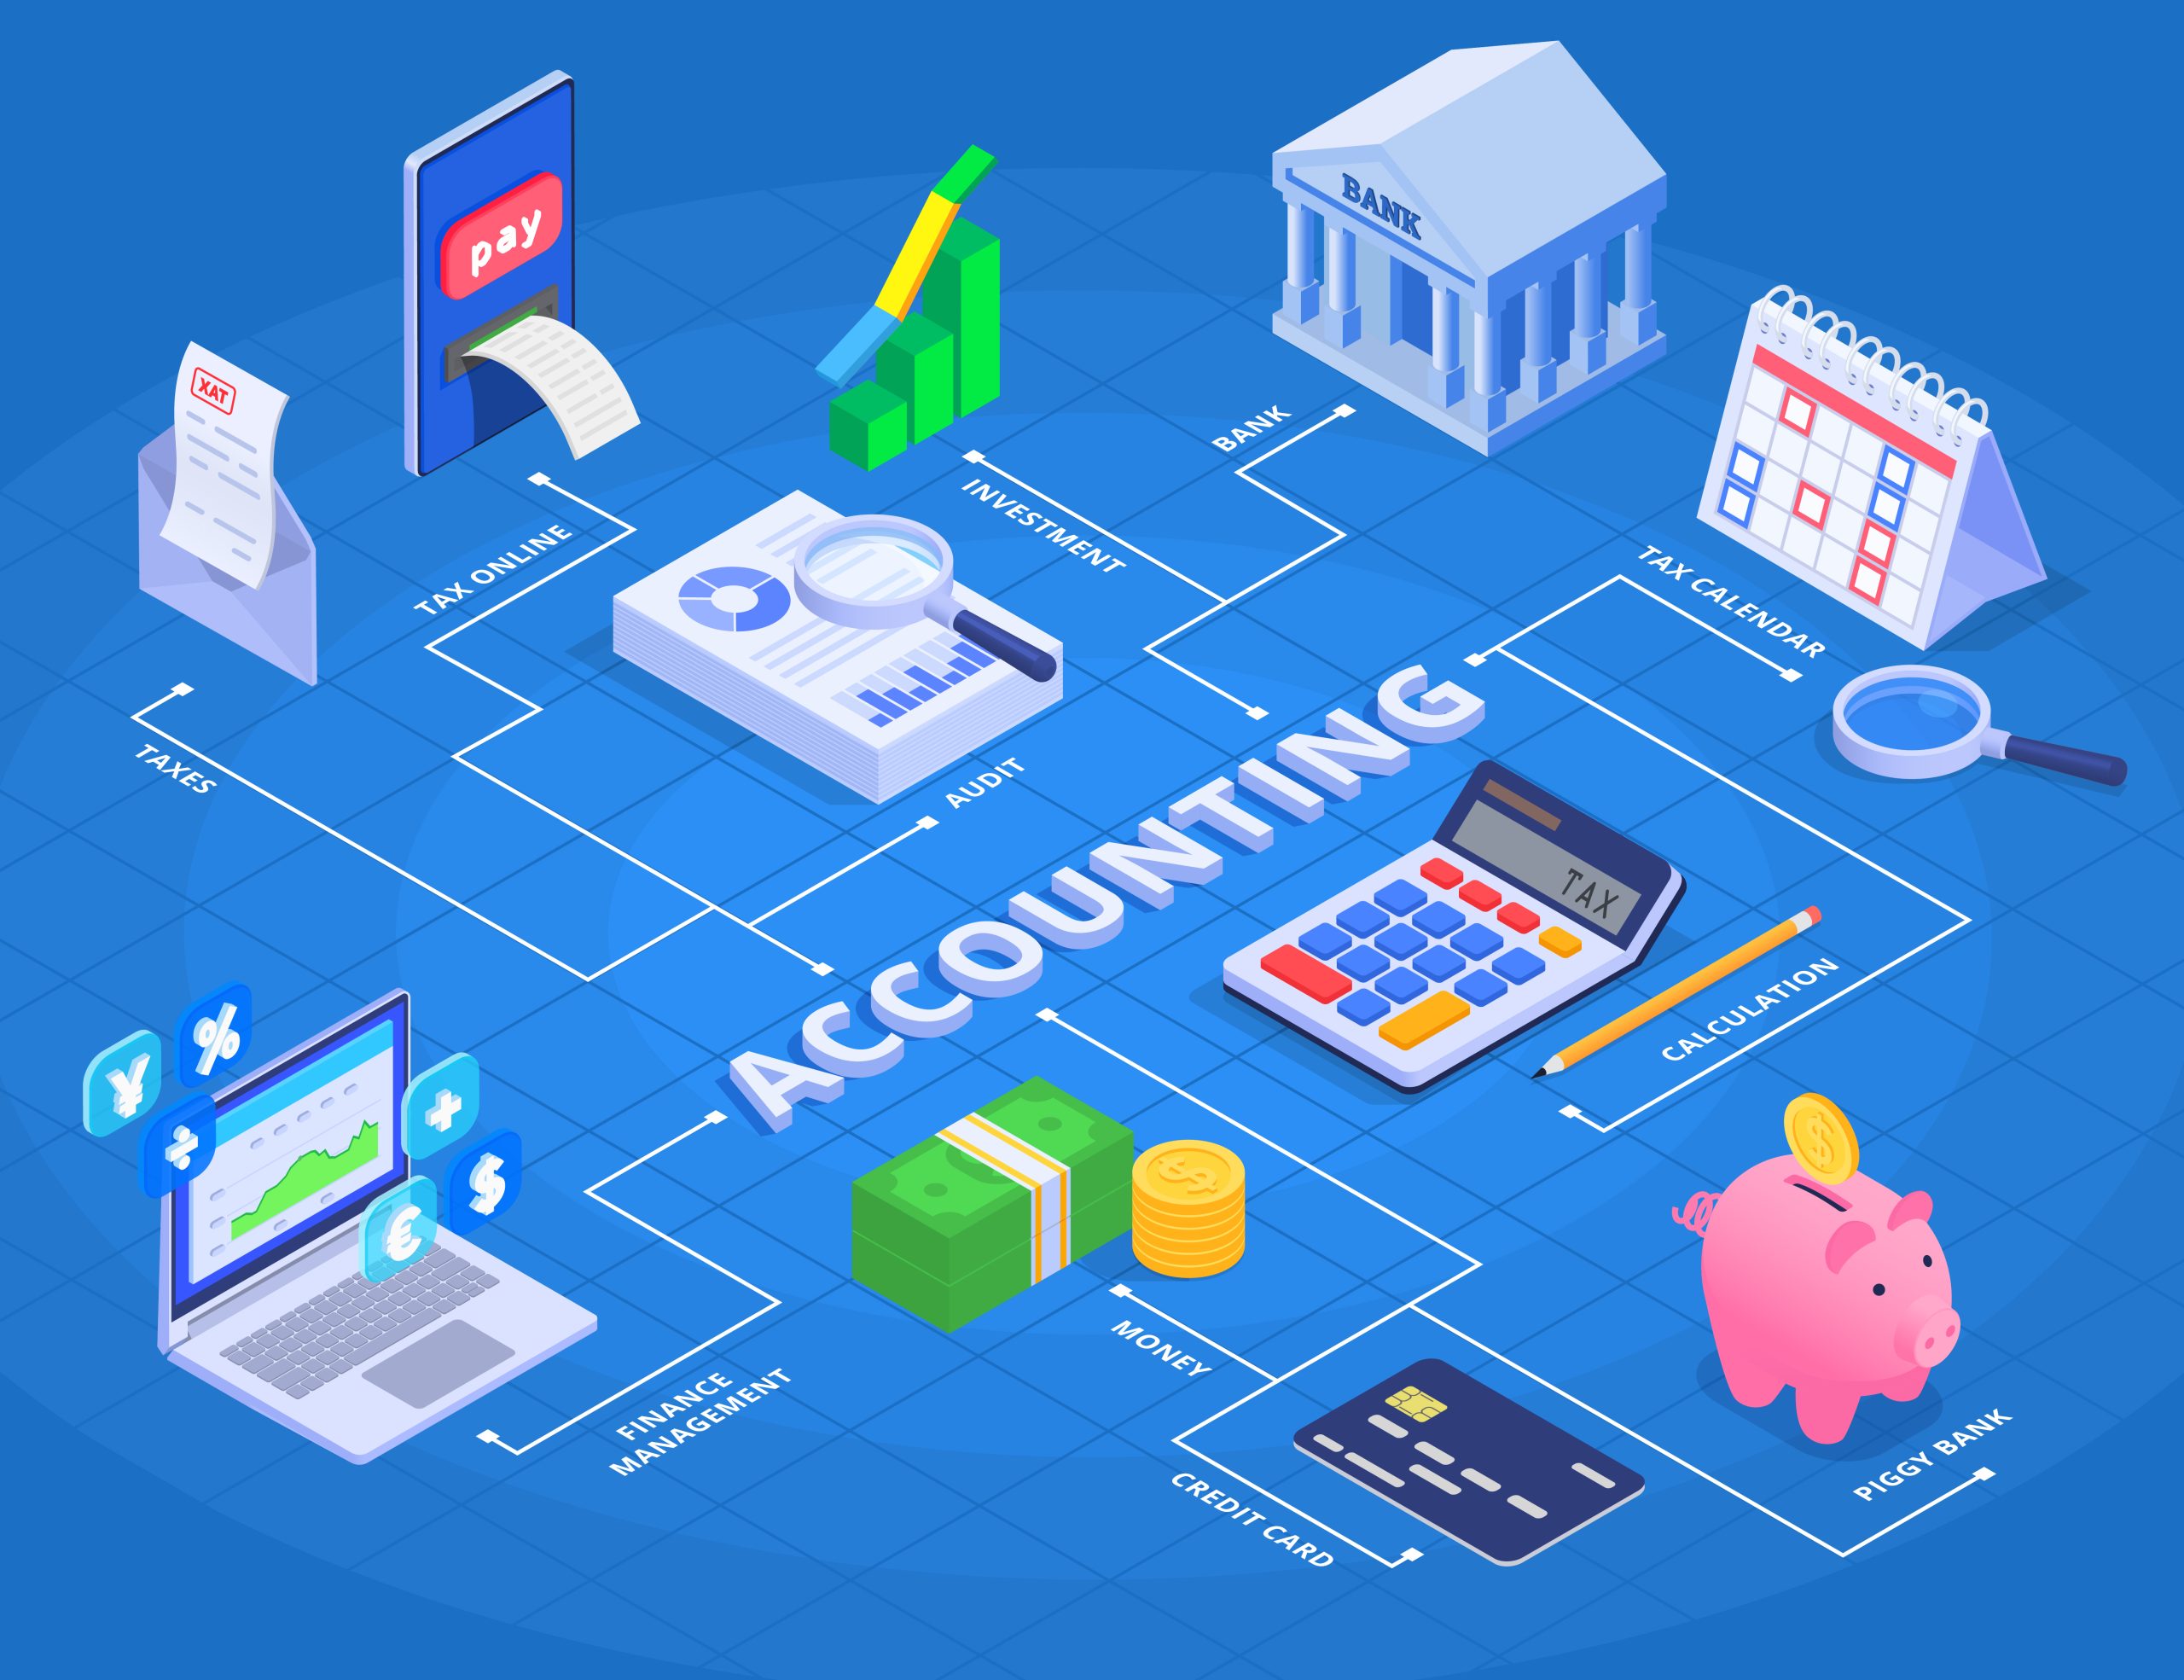 Finance & Accounting's Top o7 AI Tools for Digital Marketing